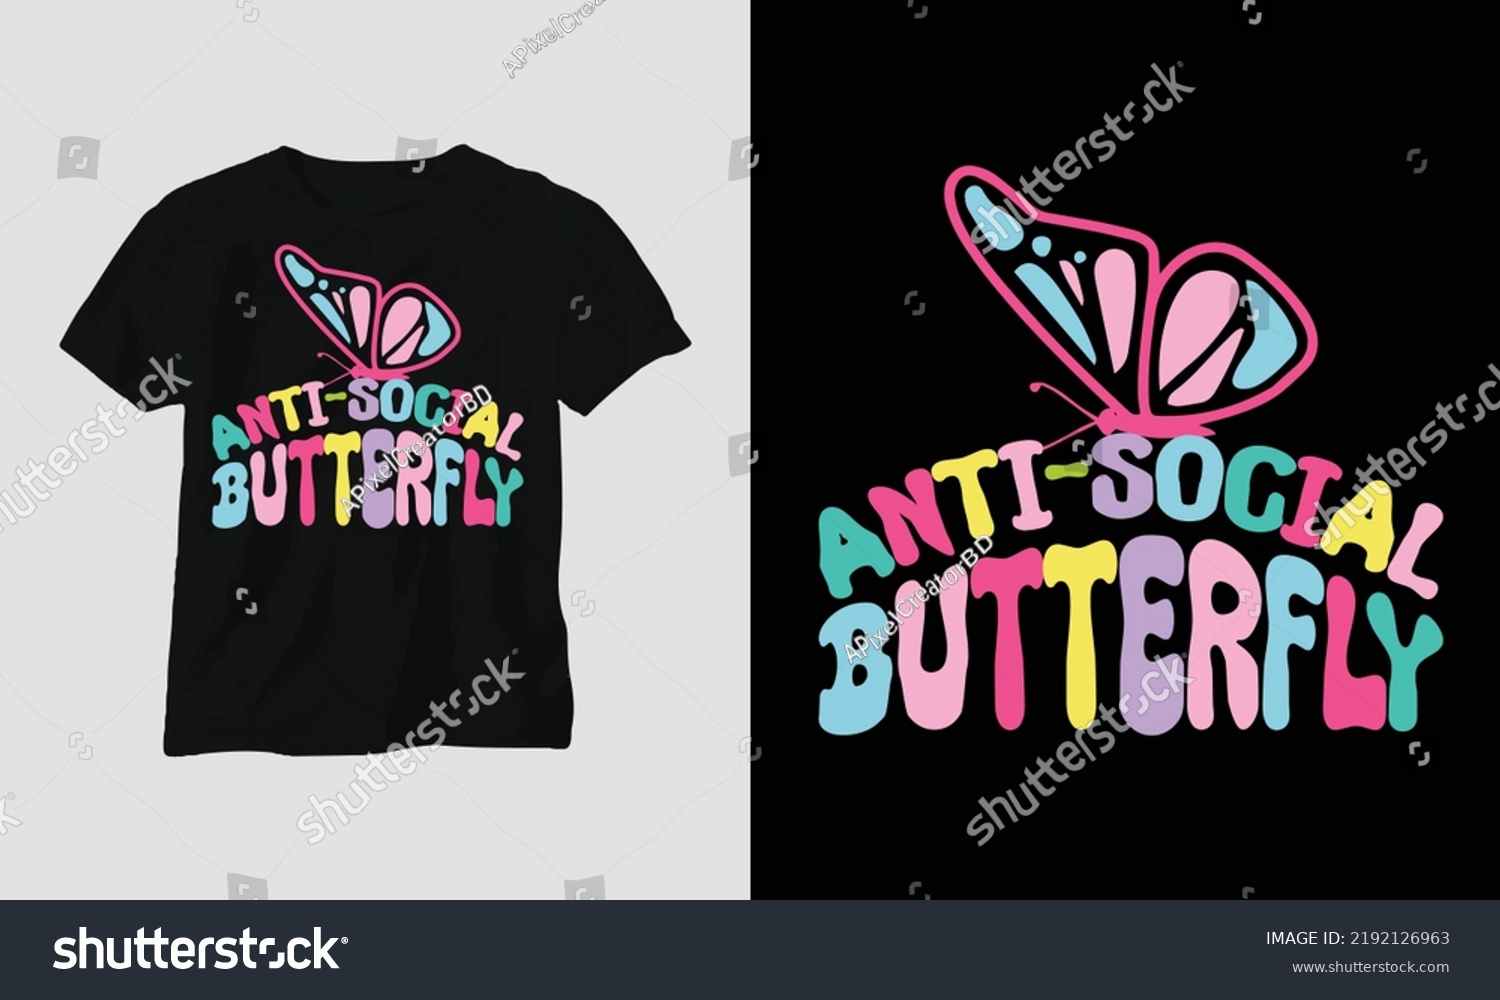 SVG of Wavy Retro Groovy T-shirt Design. Quotes with “anti-social butterfly” Design vector Graphic Design T-Shirt, mag, sticker, wall mat, etc. Design vector Graphic Template svg